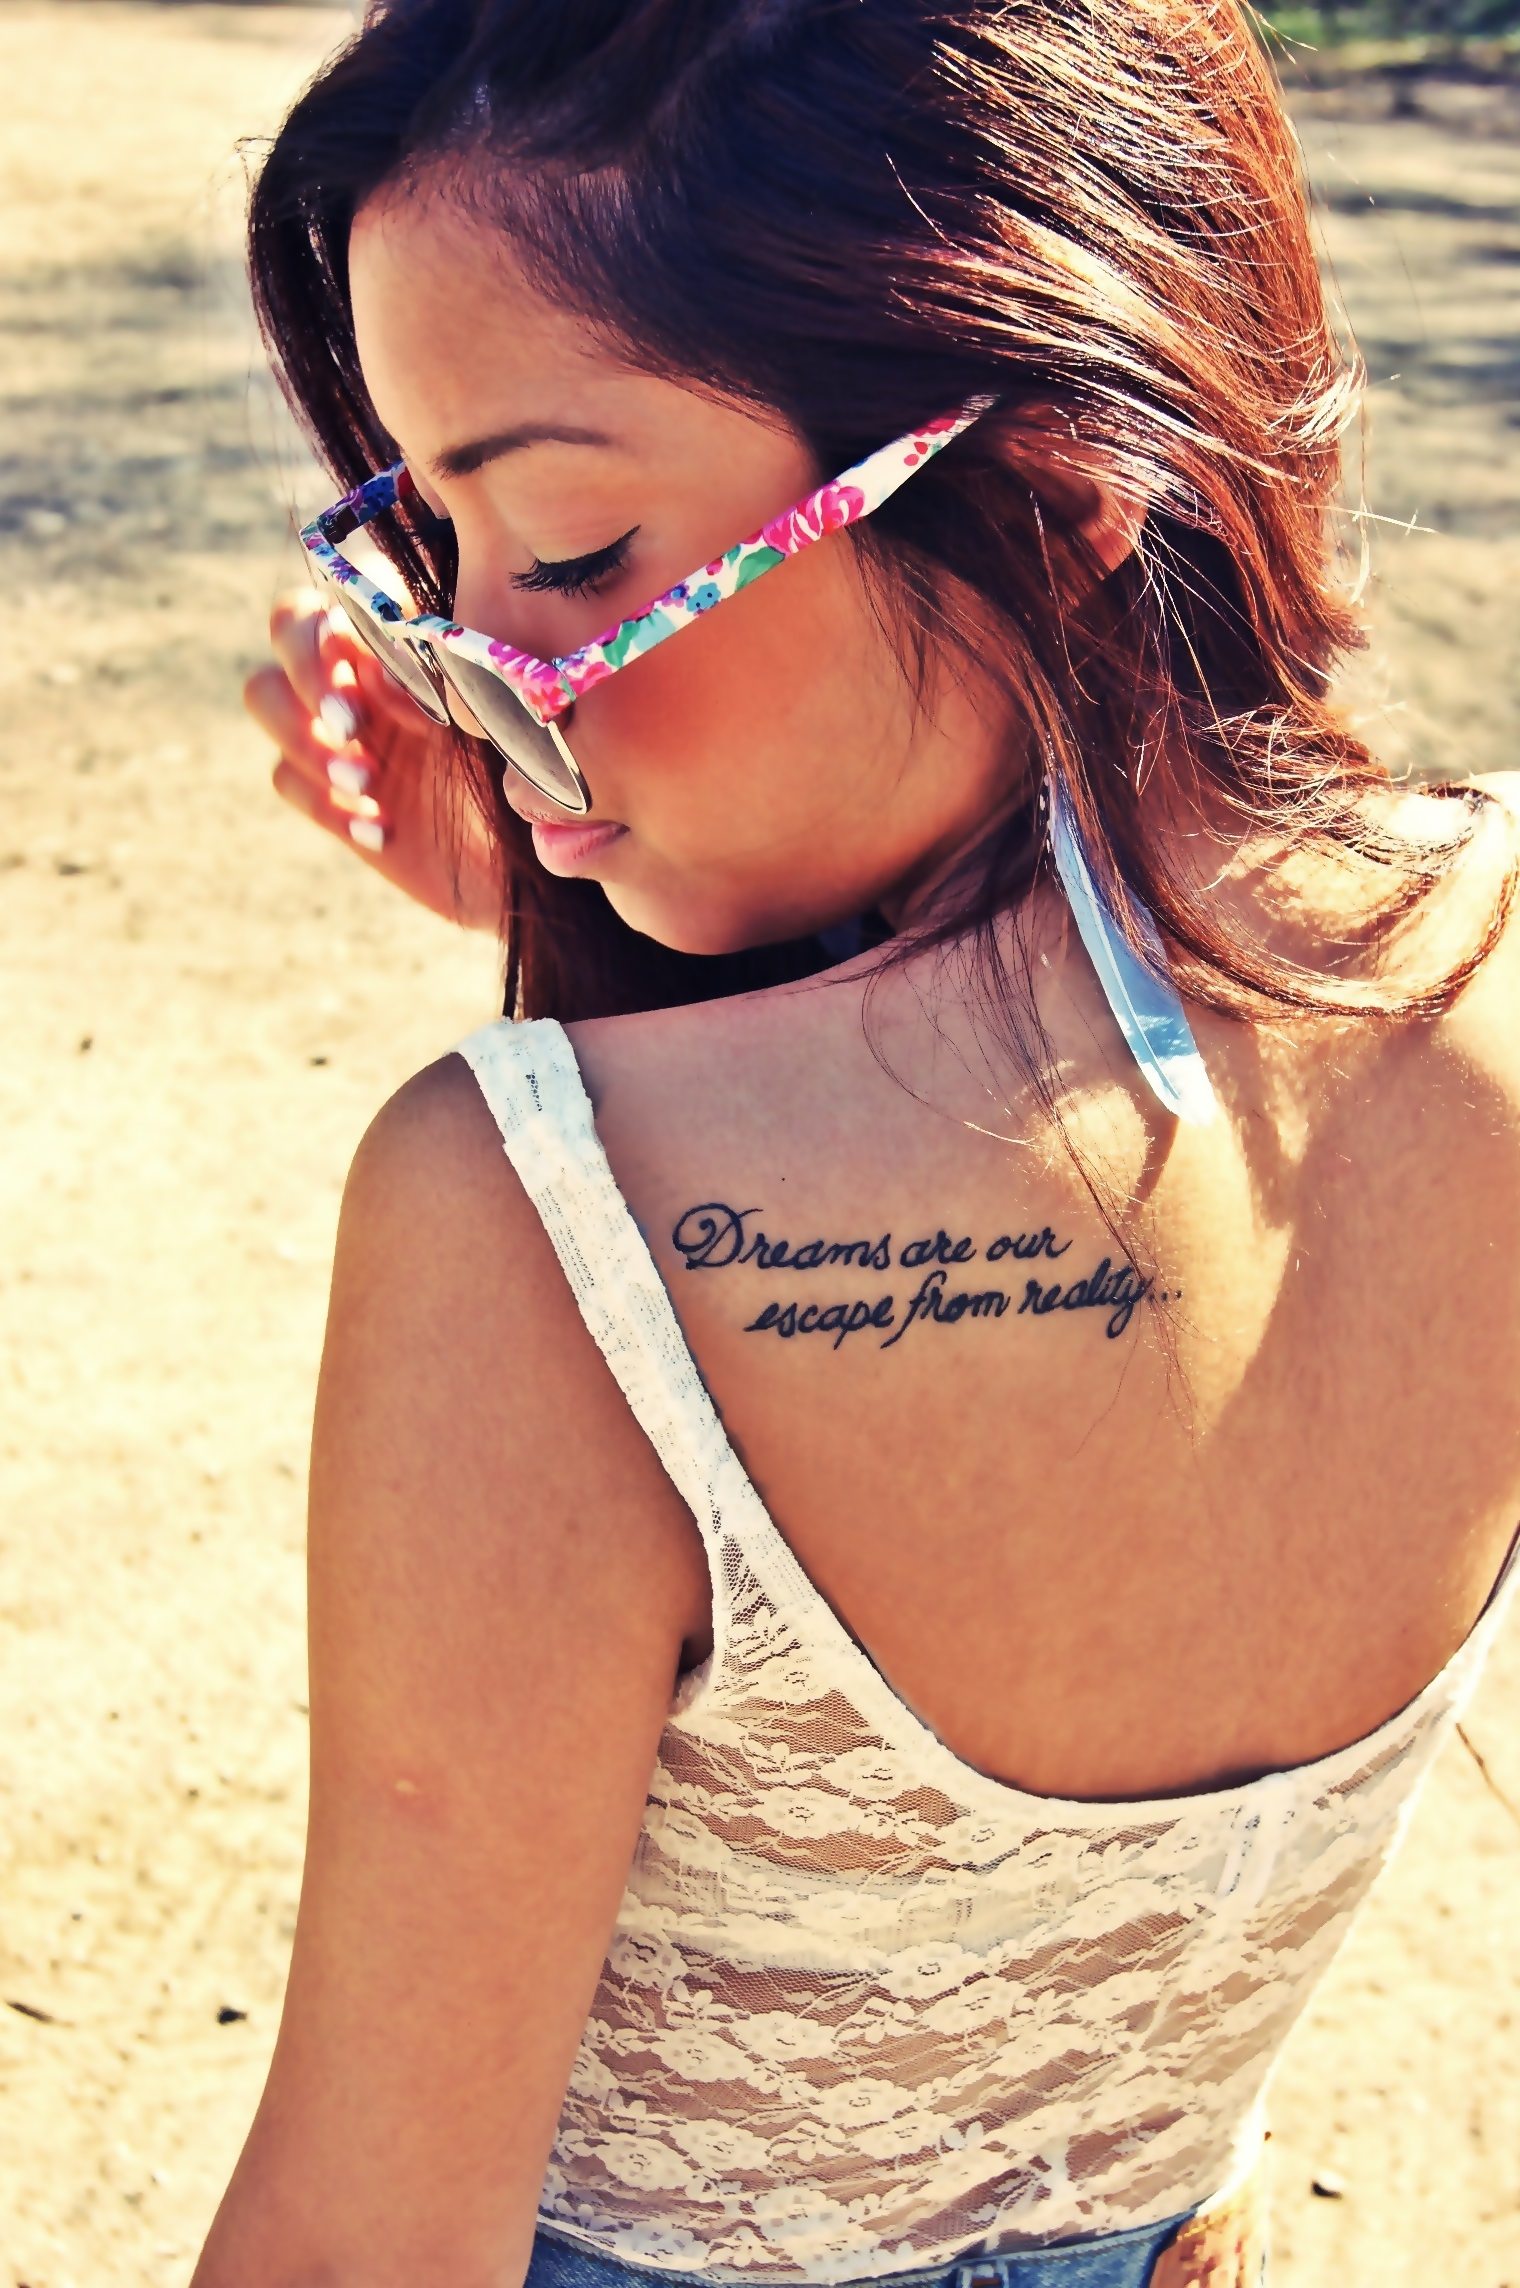 Infinity Tattoos With Quotes On Shoulders QuotesGram